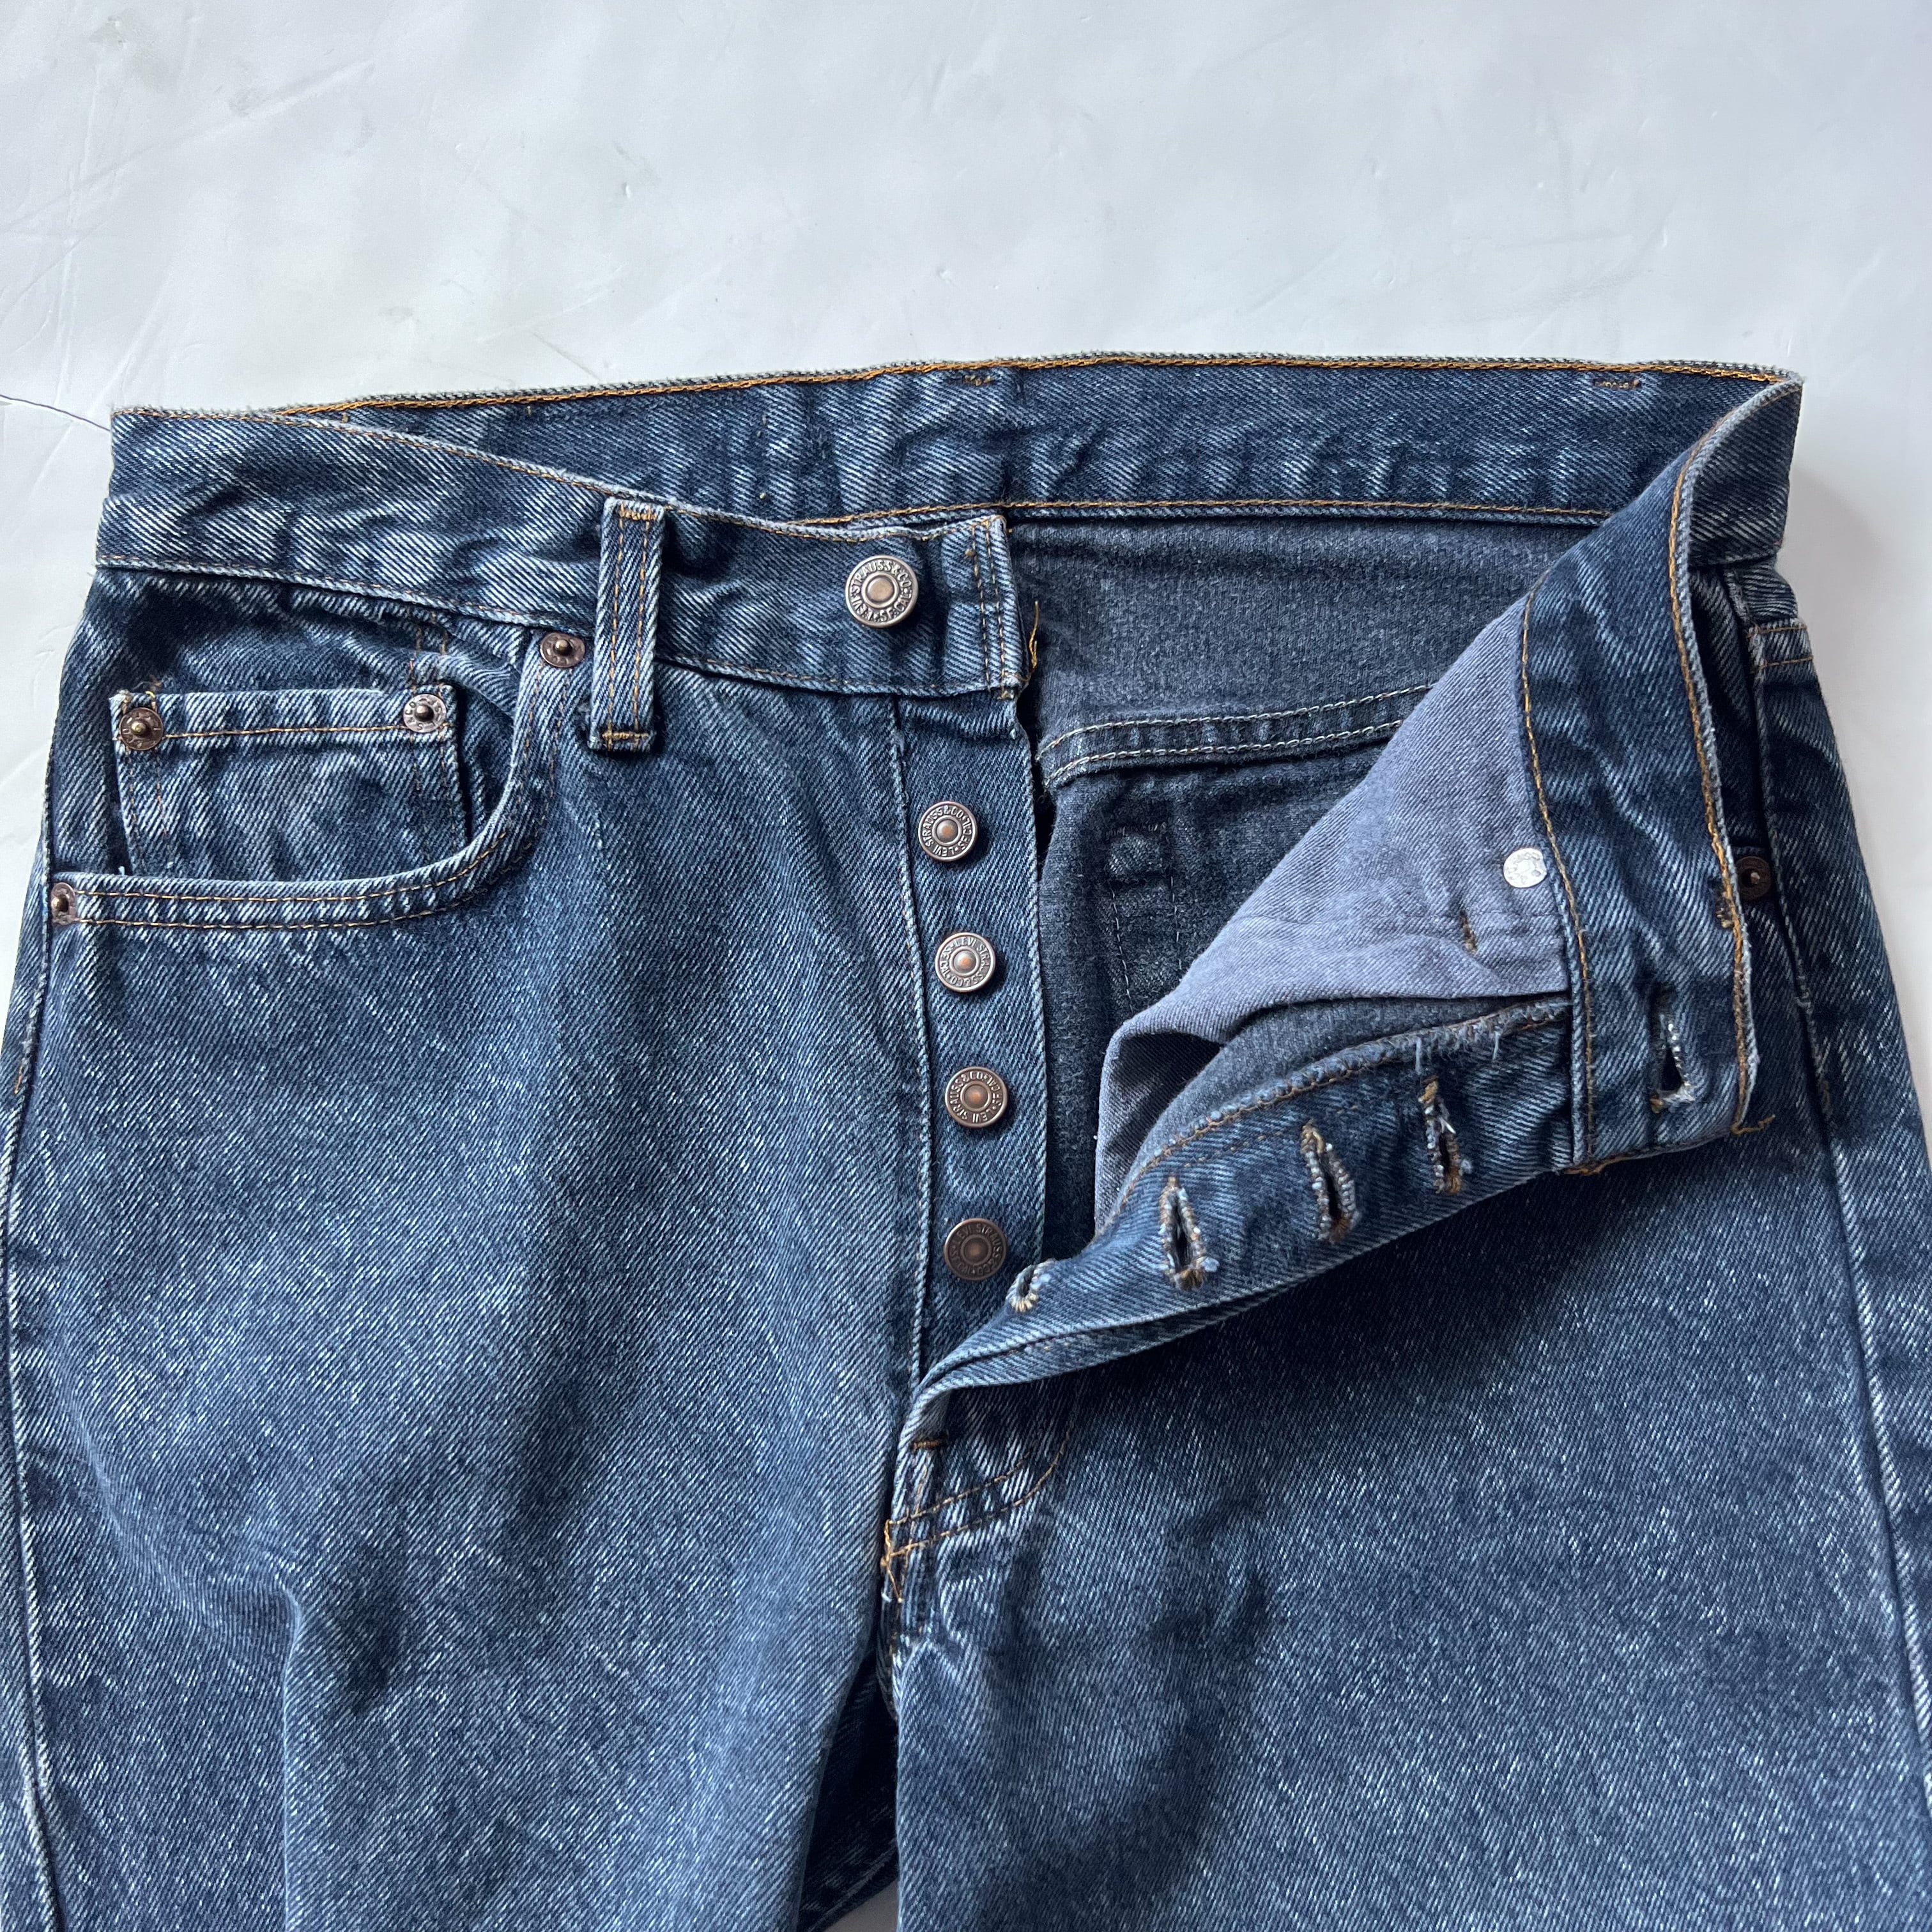 s “Levis ” WL chemical washed denim pants made in usa